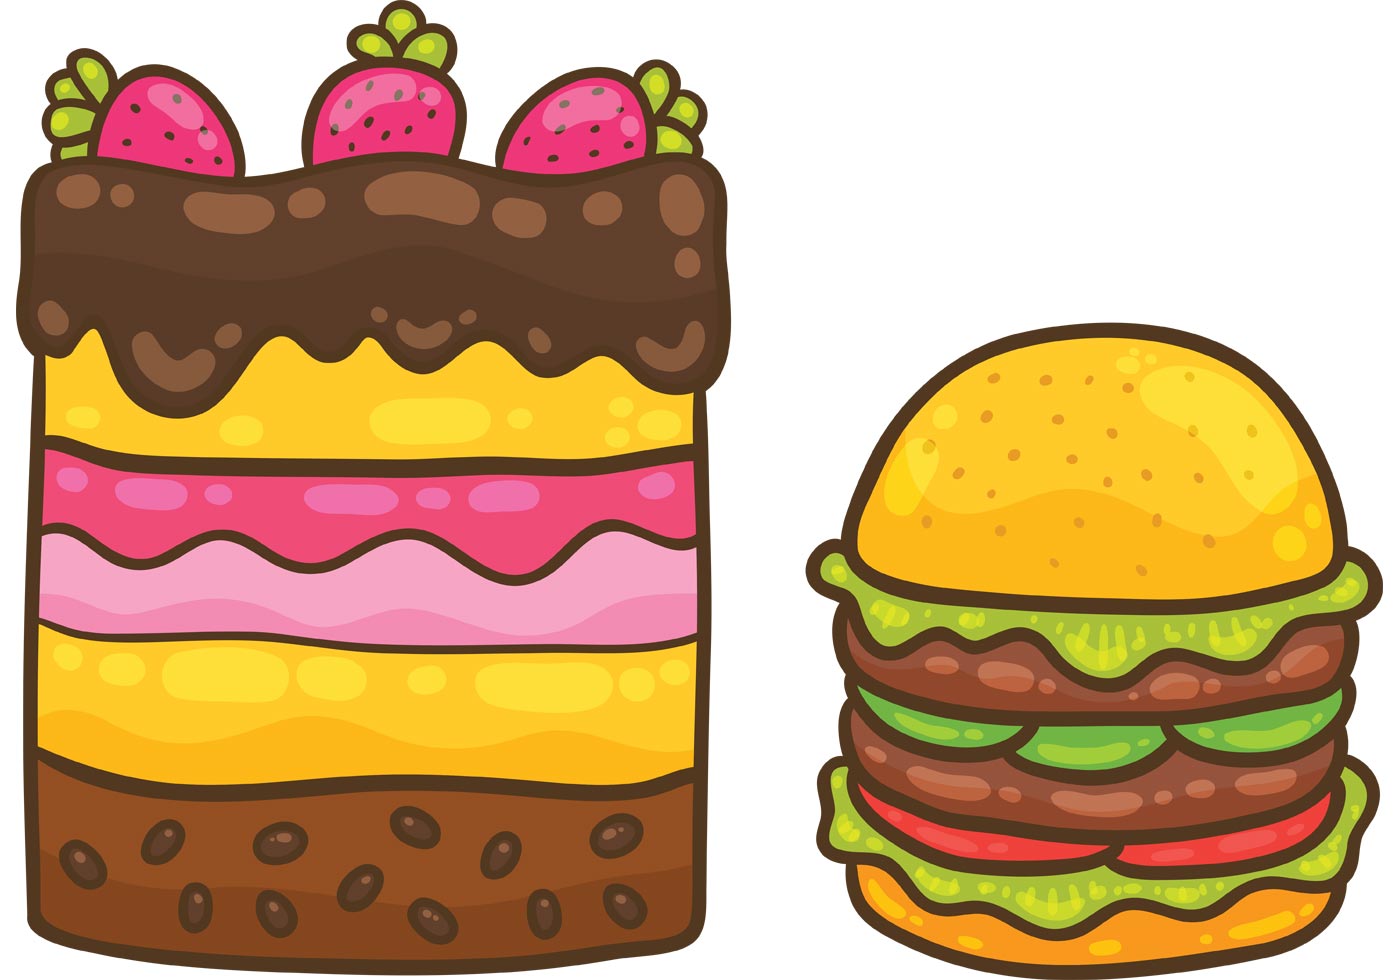 Free Burger Vector with Fries - Download Free Vector Art, Stock ...